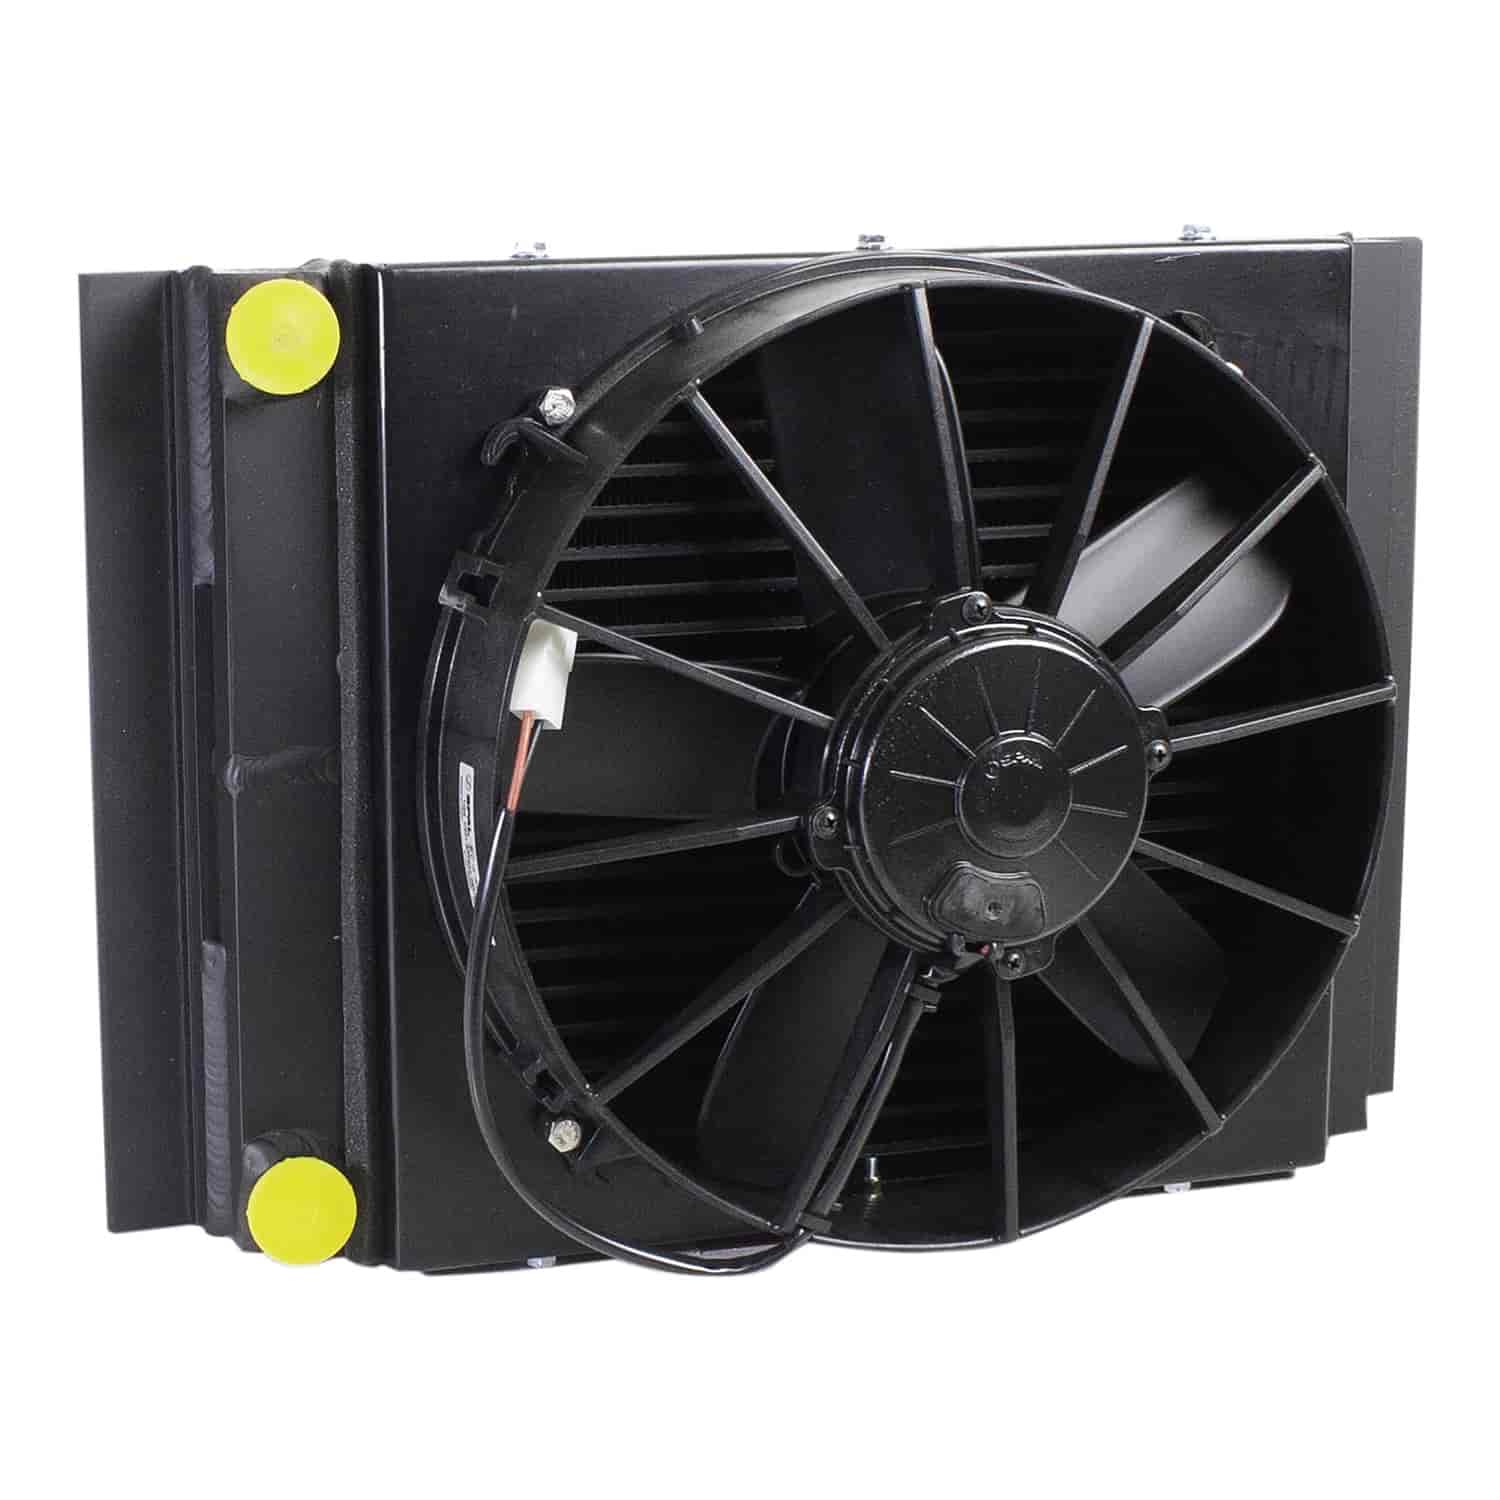 Large Universal Fluid Cooler 19.5" x 13" with Electric Fan